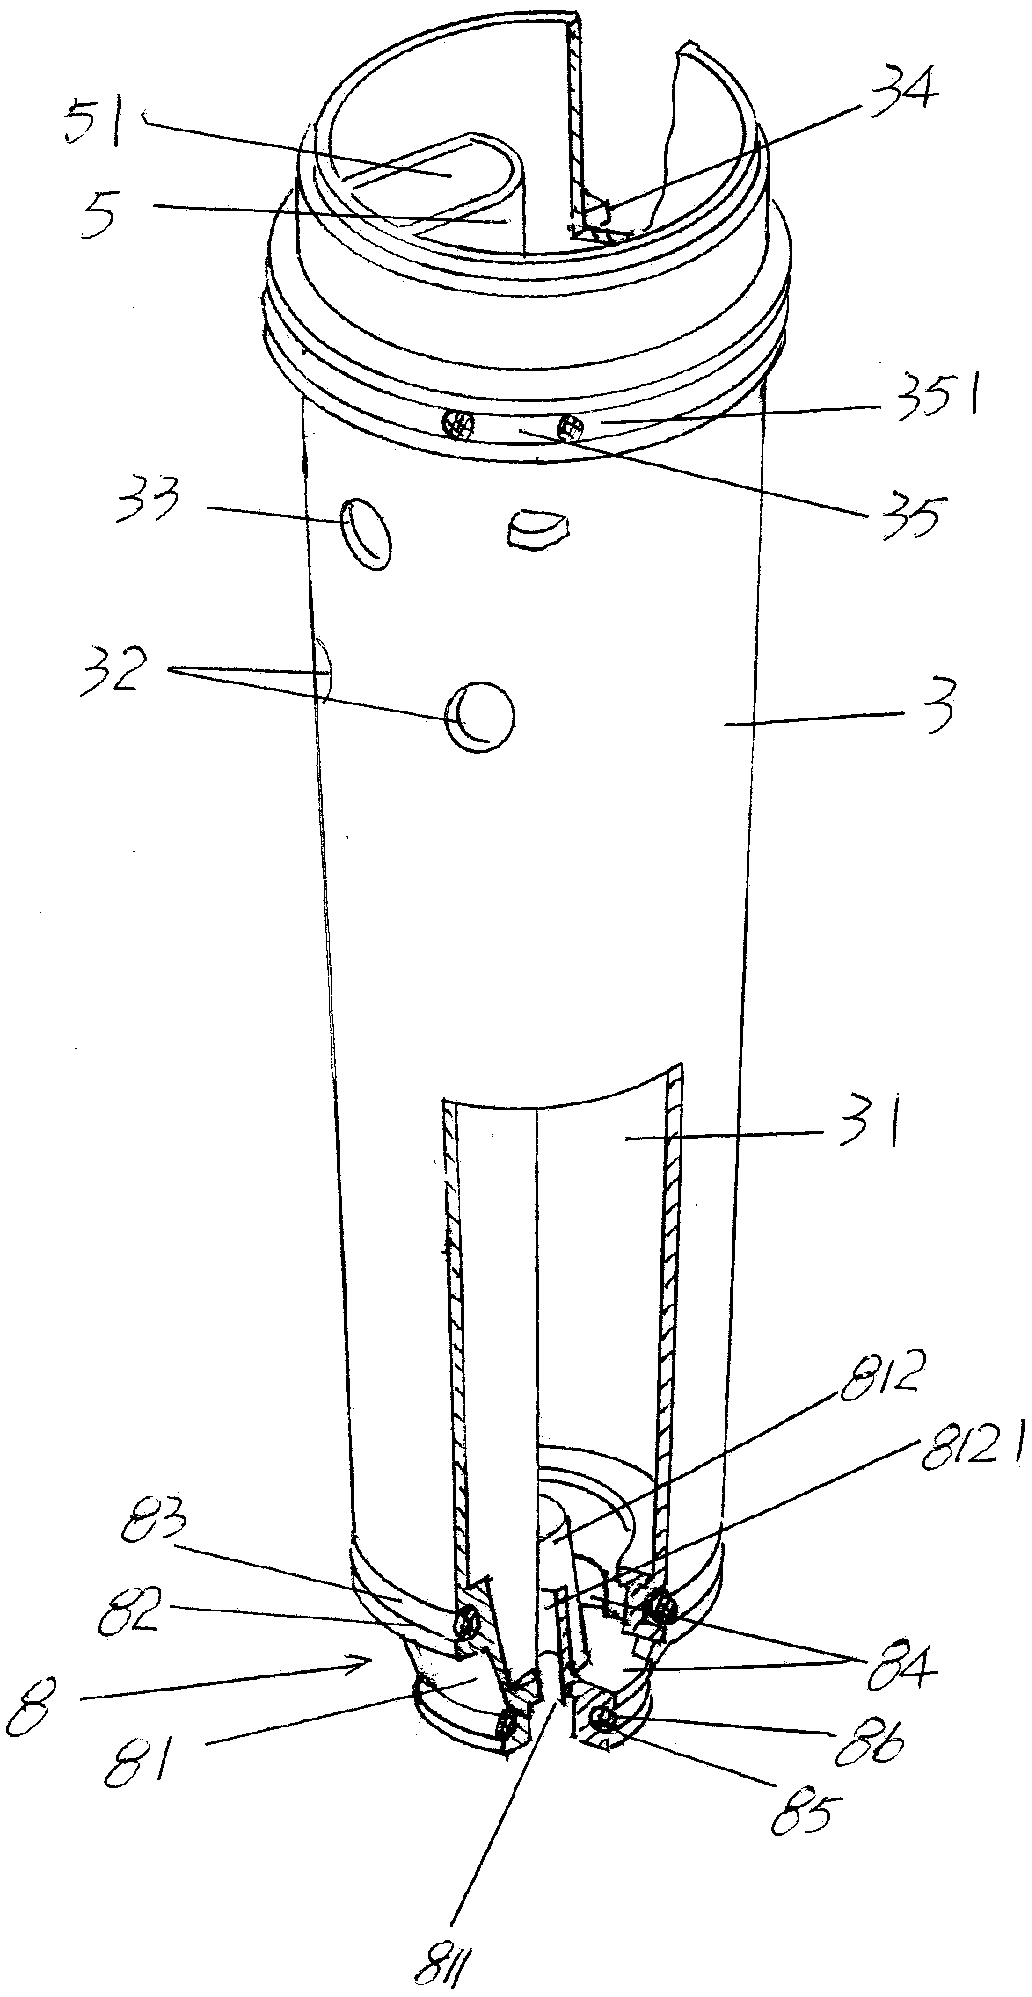 Modular combined type medical semi-automatic drainage metering device